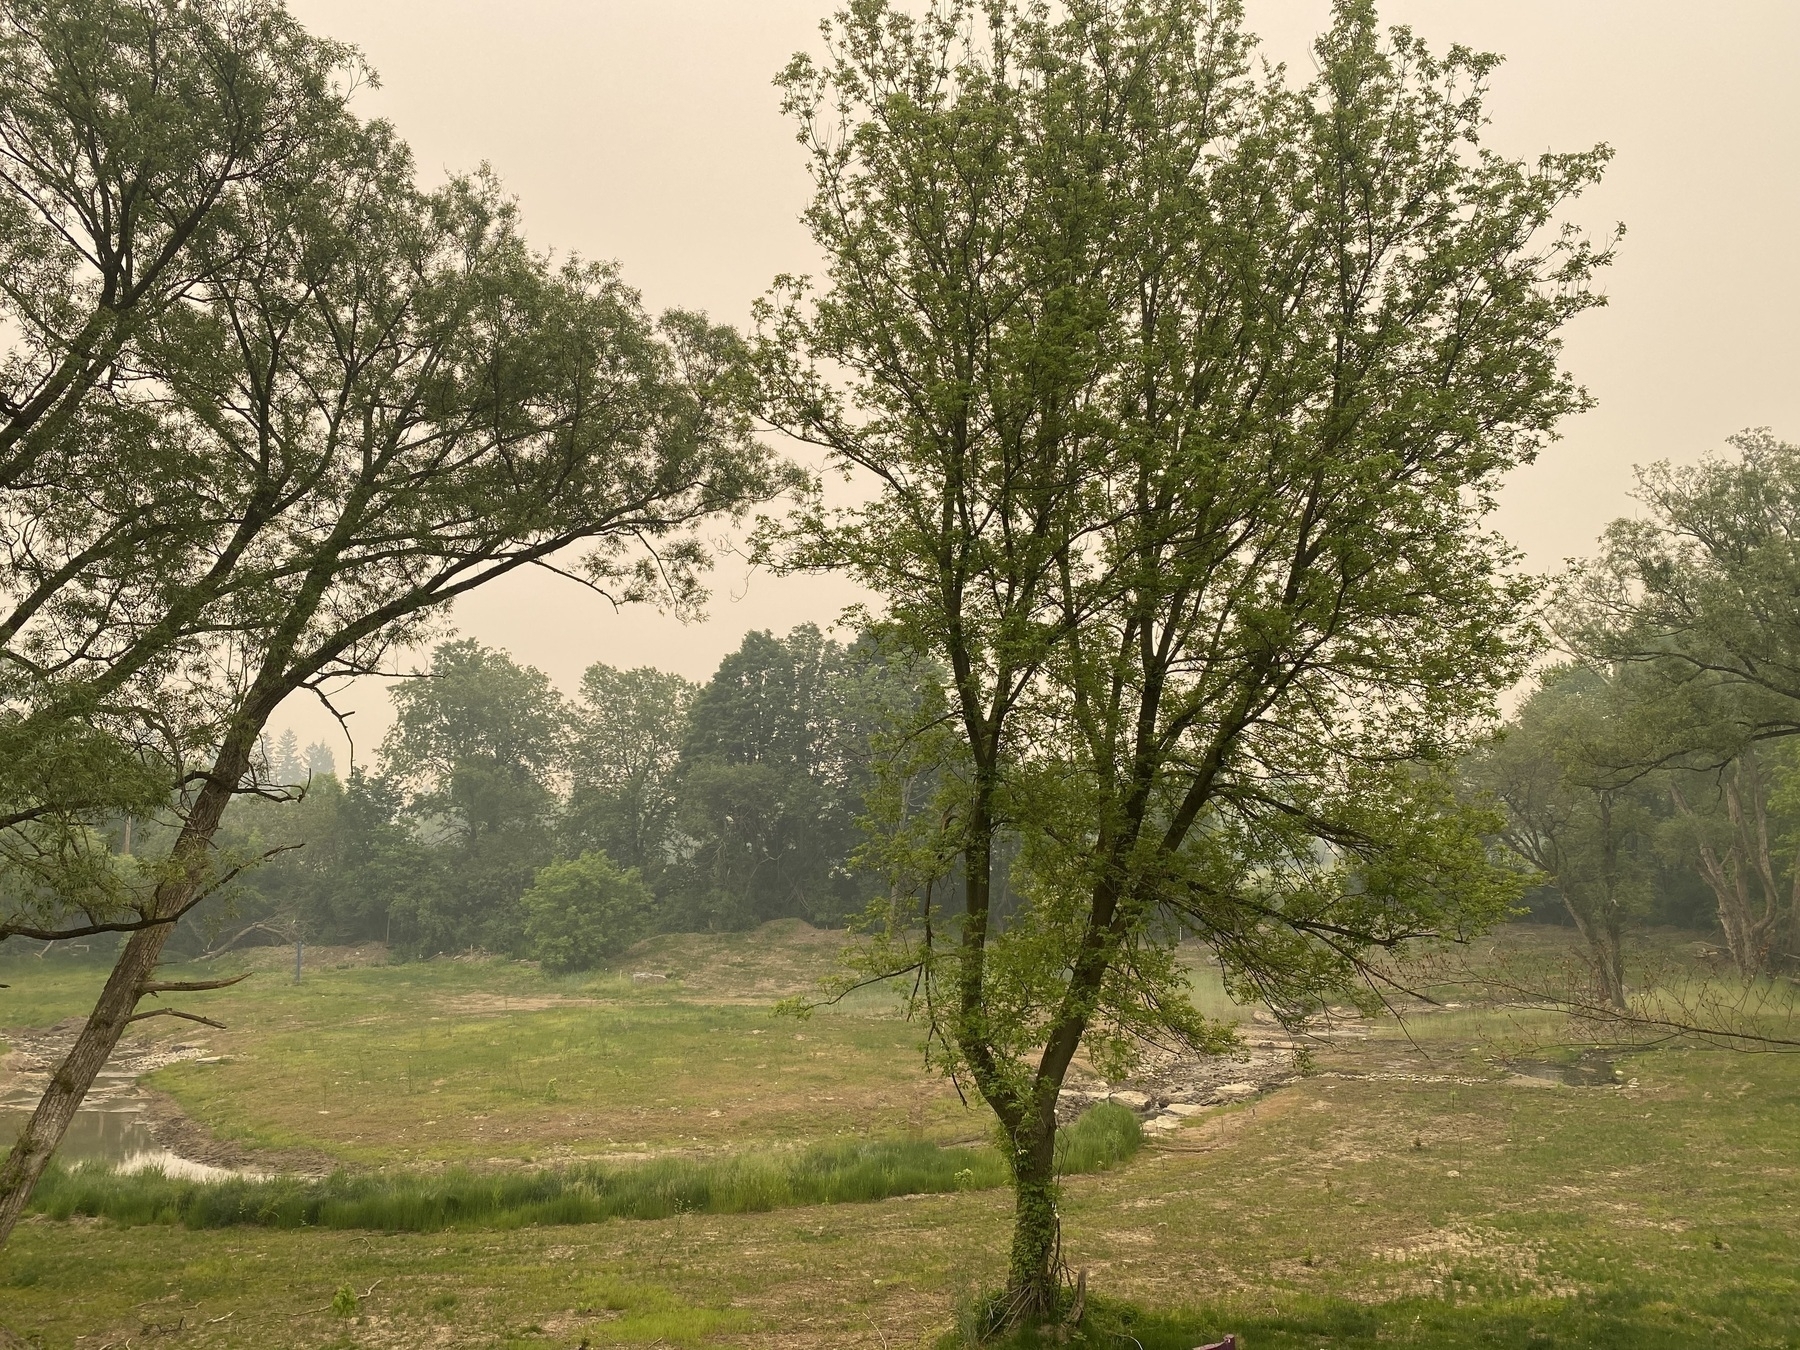 A landscape view over a field with a creek running through it. Trees along a back hedge row, and between the creek and view point. The sky is very hazy and the entire picture has an orange overtone.